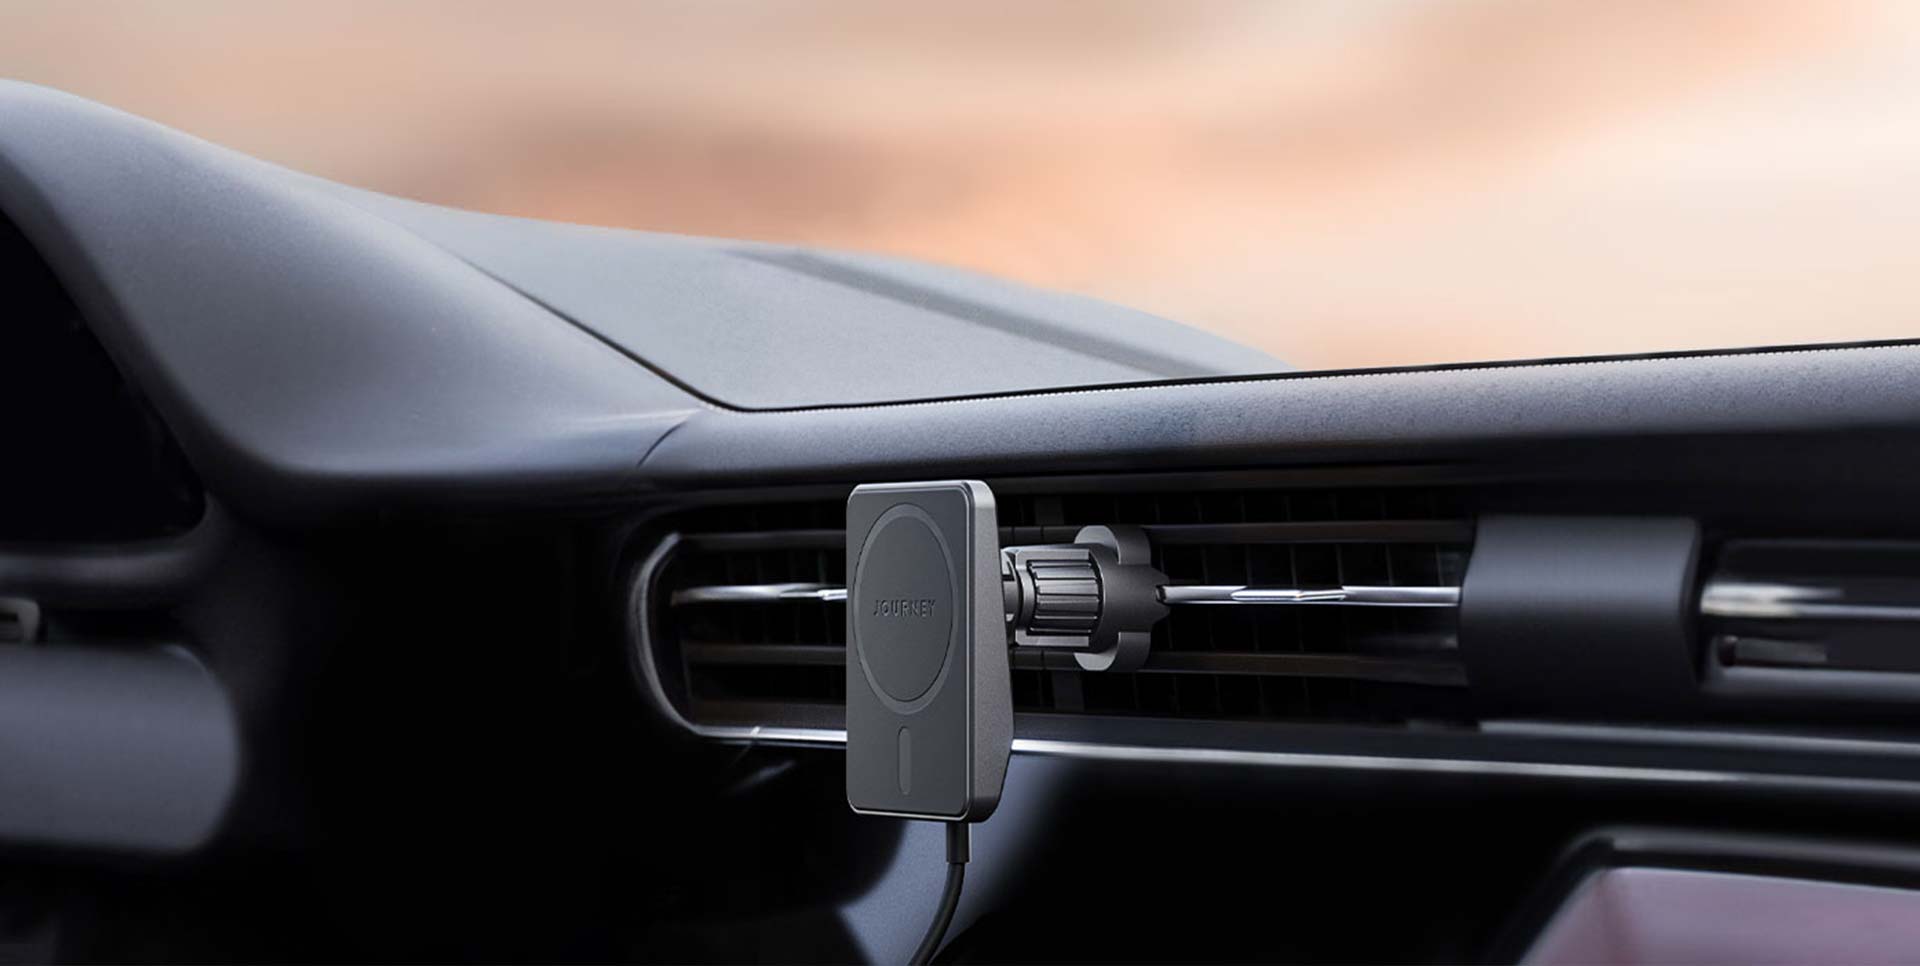 JOURNEY Expands its Range of In-Car Mobile Device Chargers